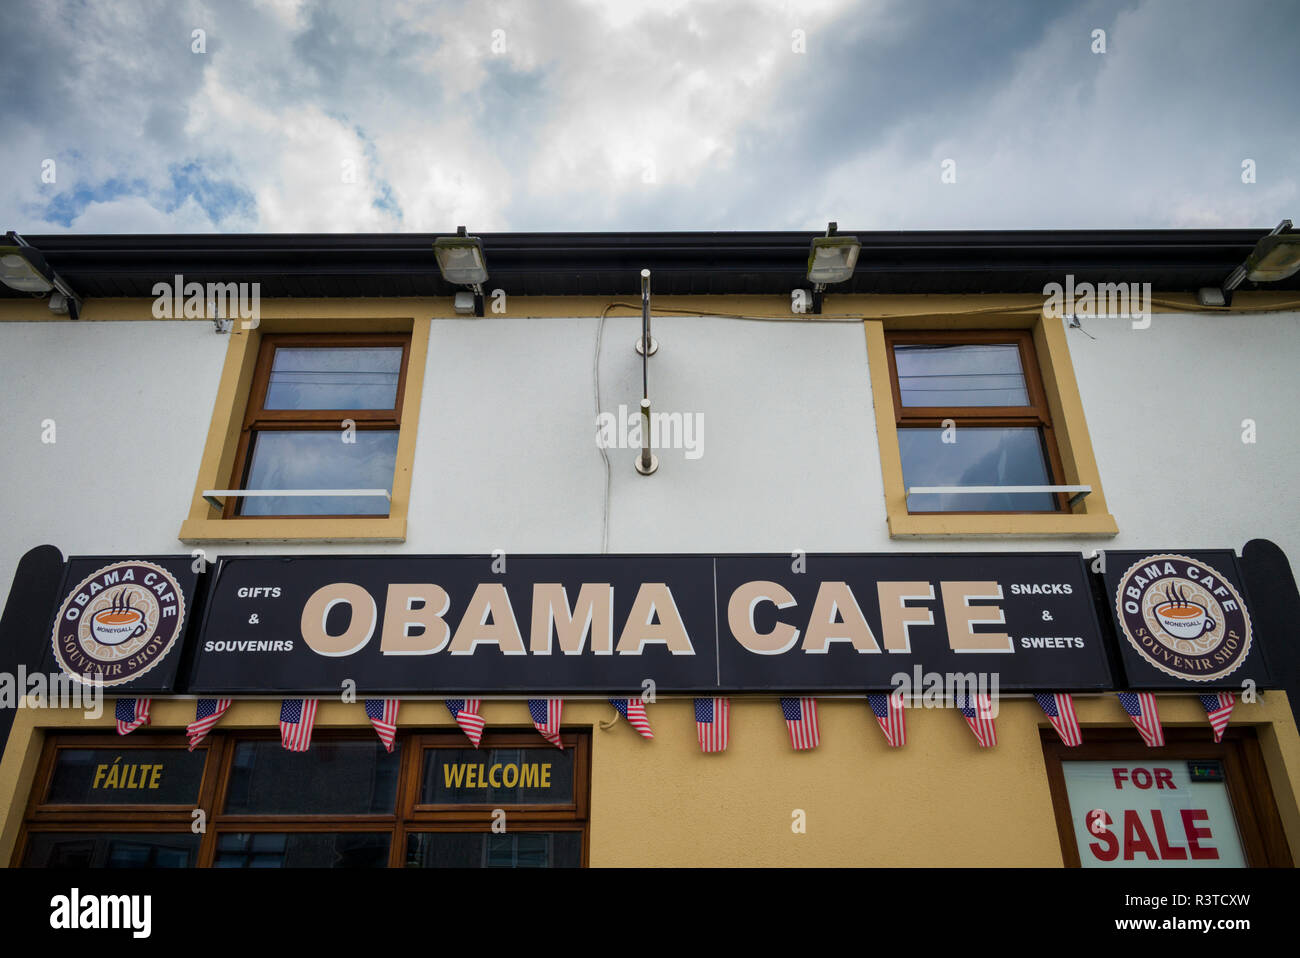 Ireland, County Offaly, Moneygall, The Obama Cafe Stock Photo